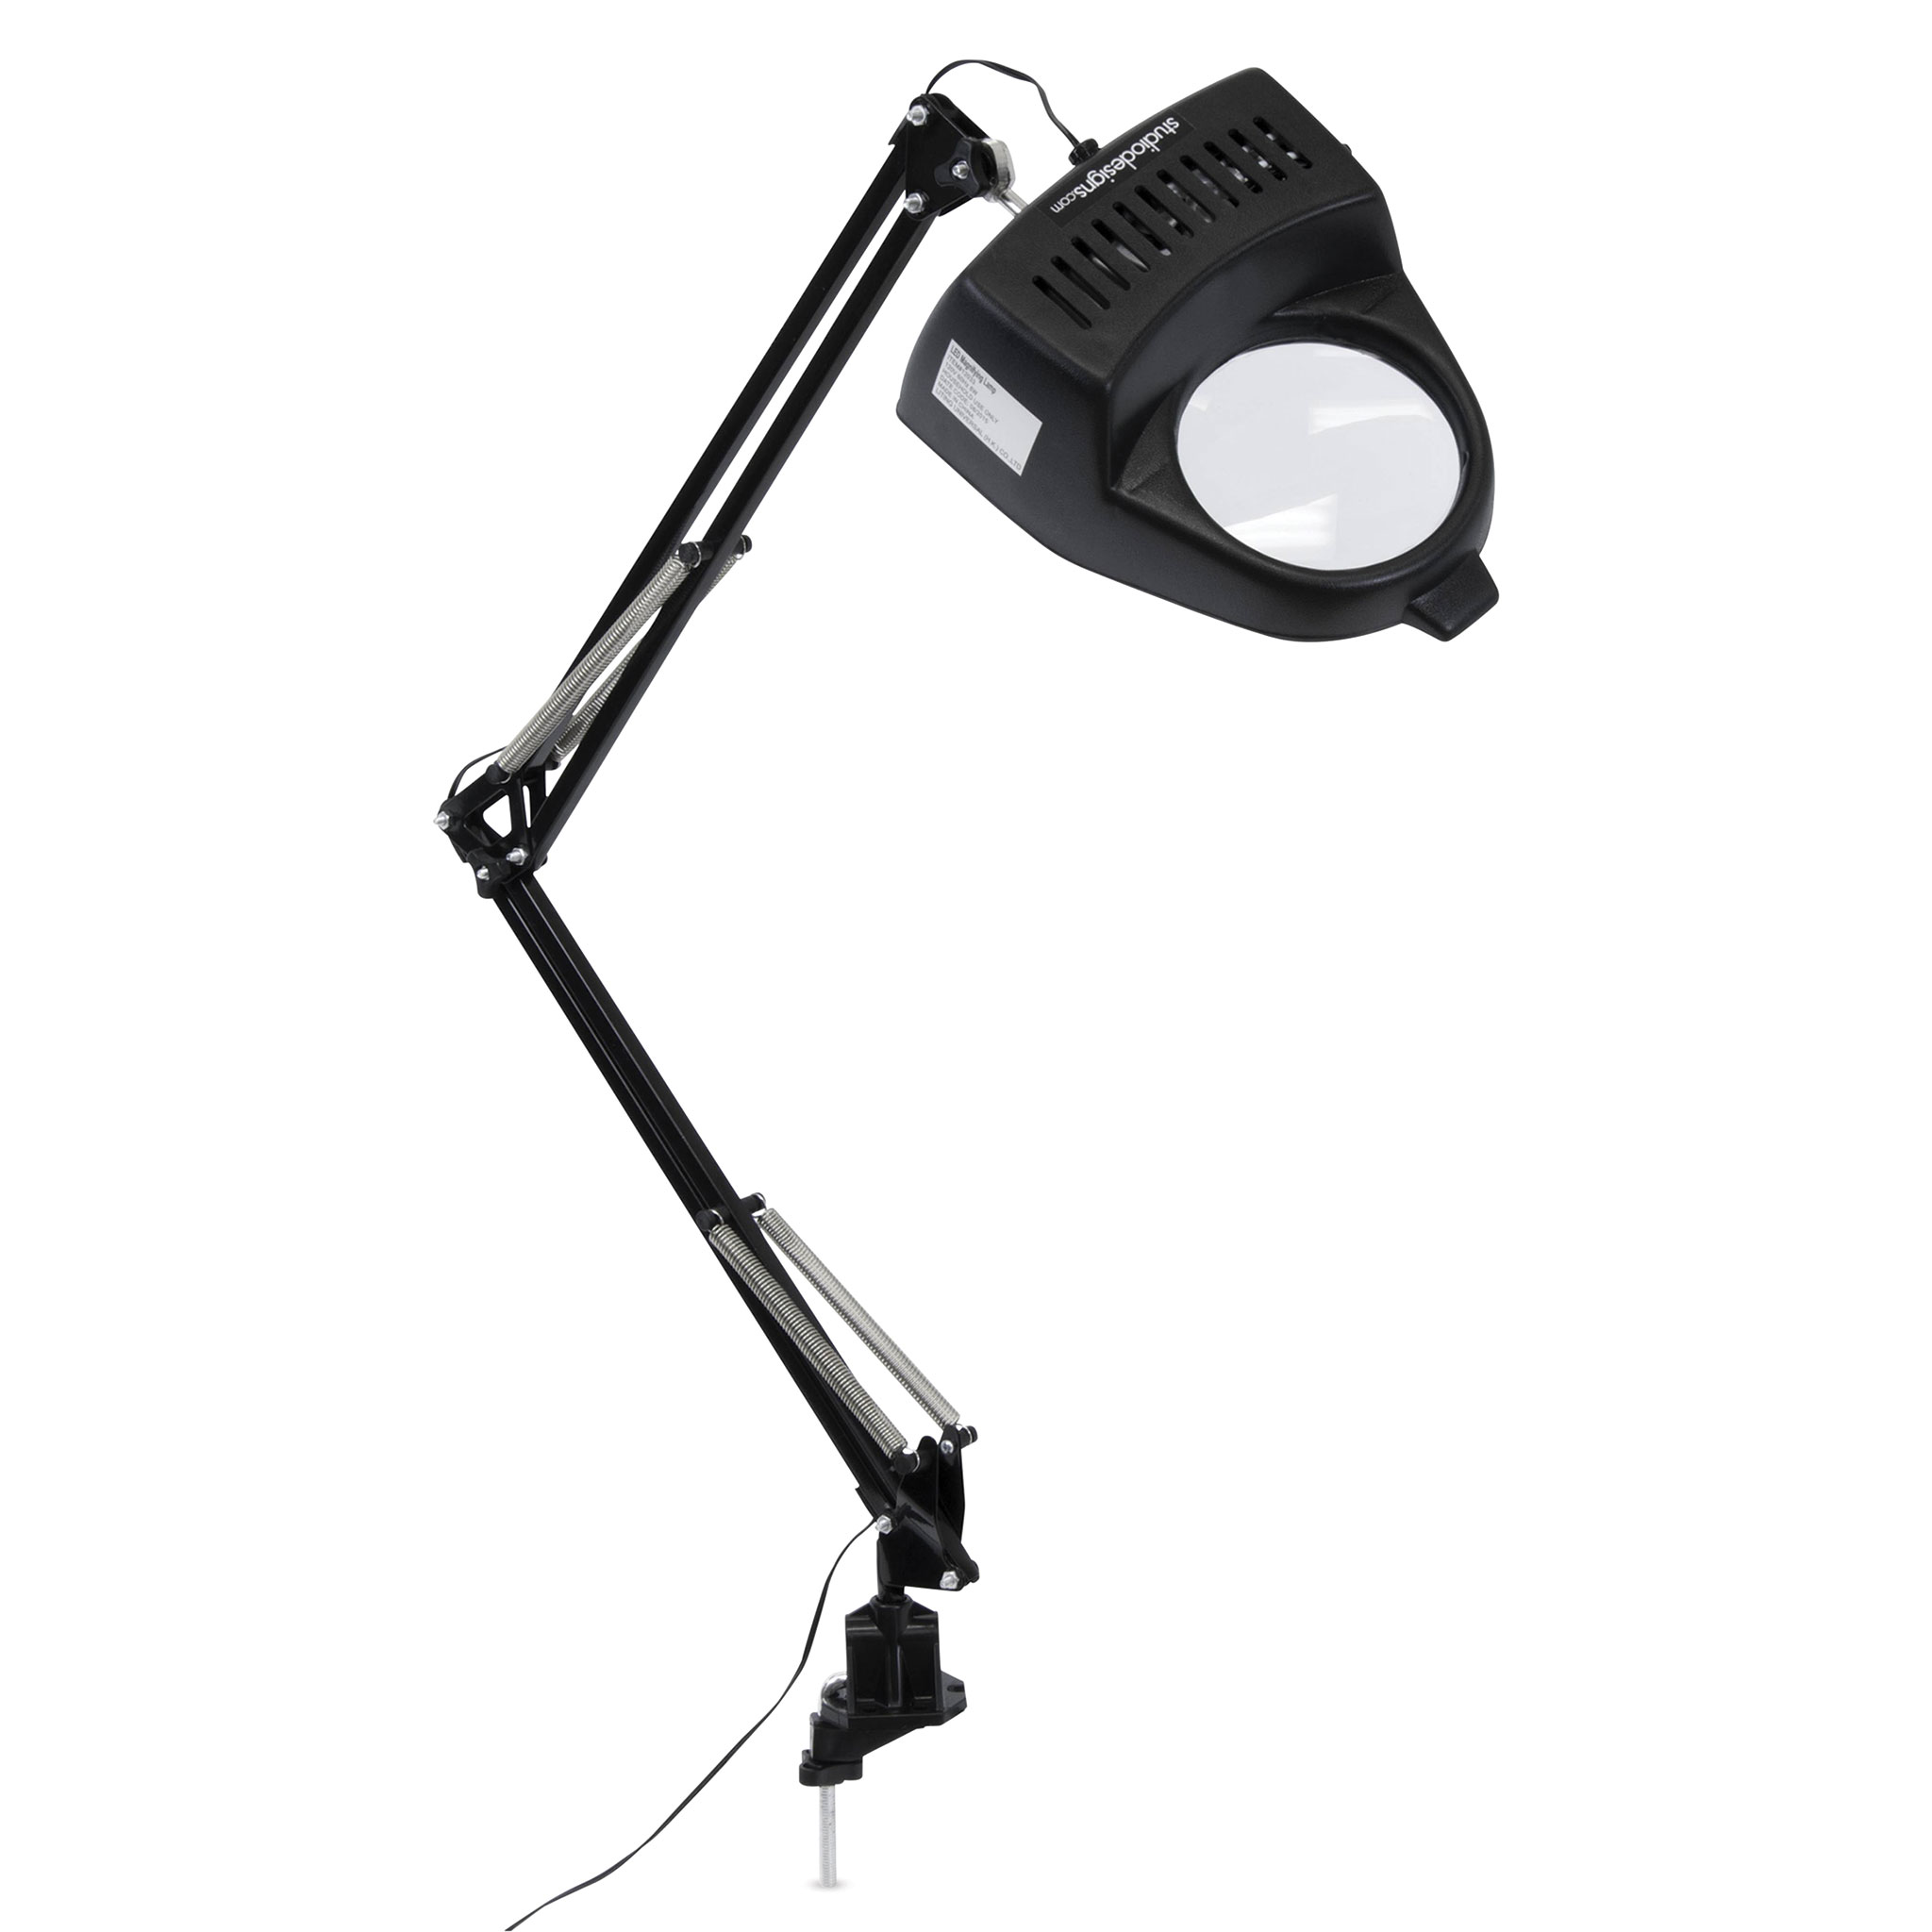 LED Magnifying Lamp - The Art Store/Commercial Art Supply